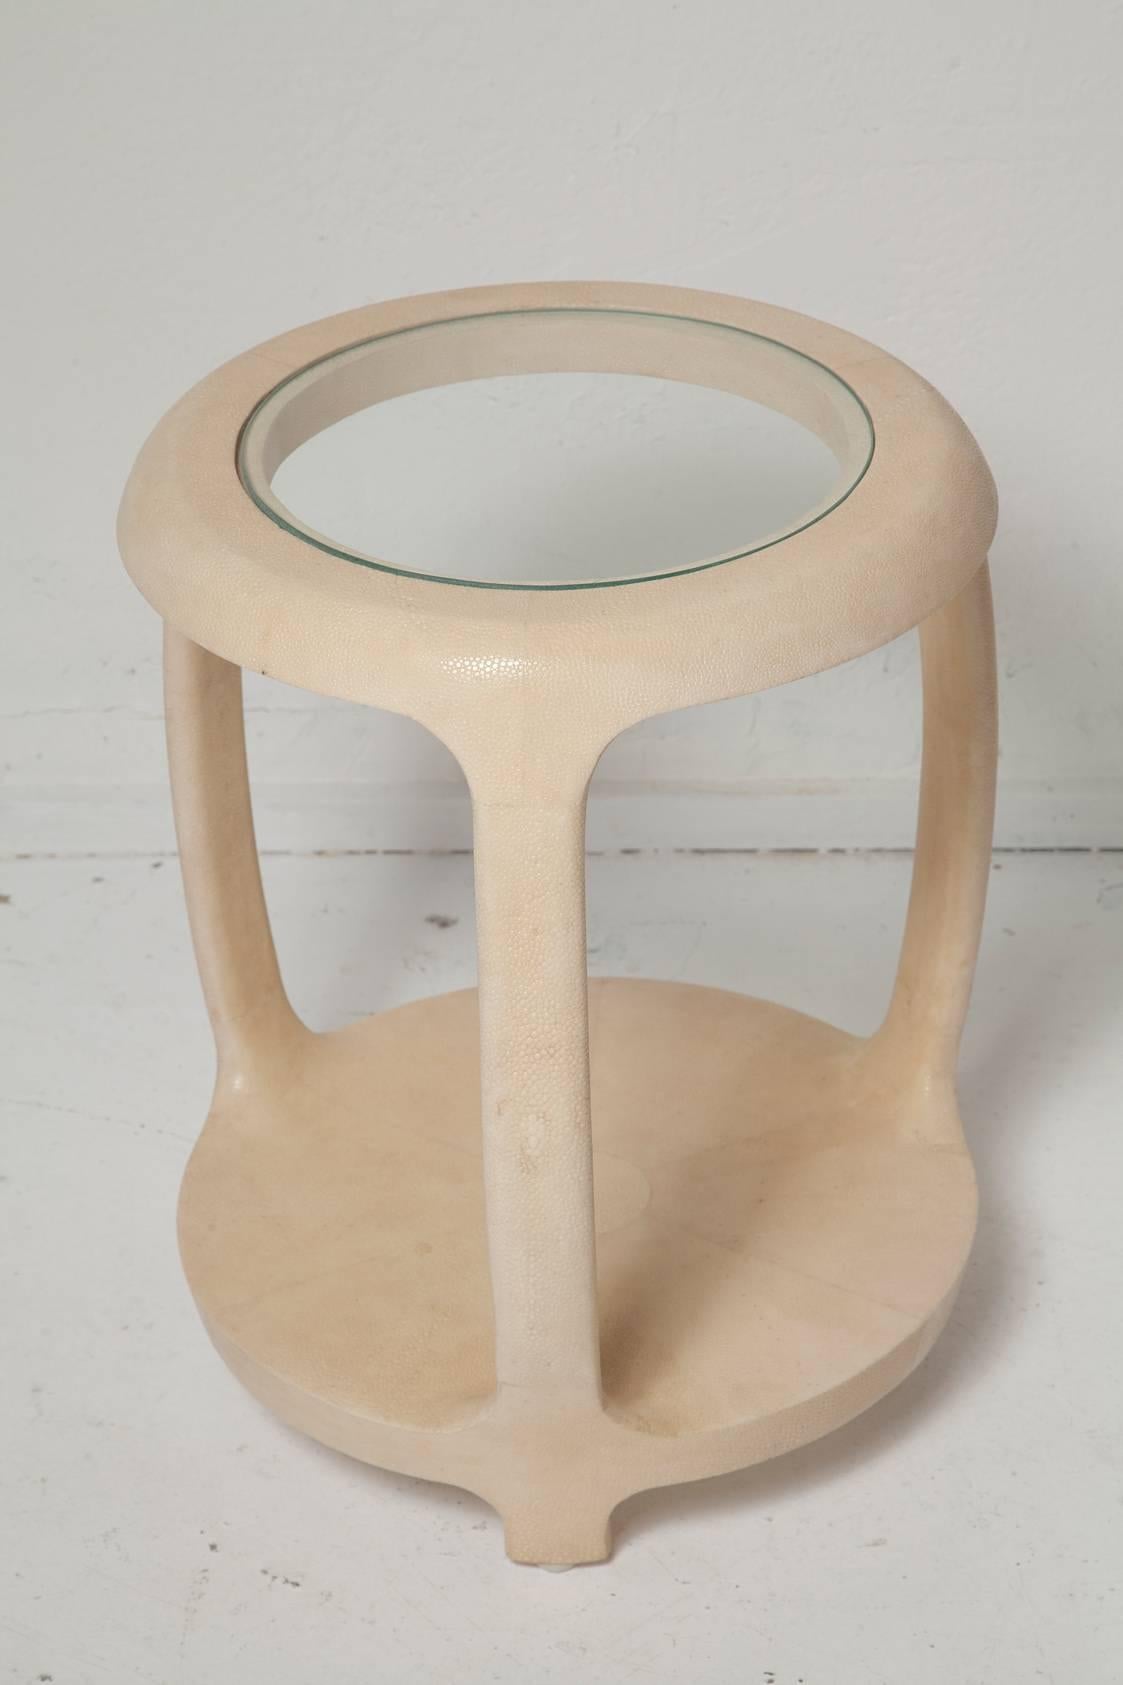 Subtle vanilla shagreen side table with glass top by Maitland Smith. Brass label on underside.